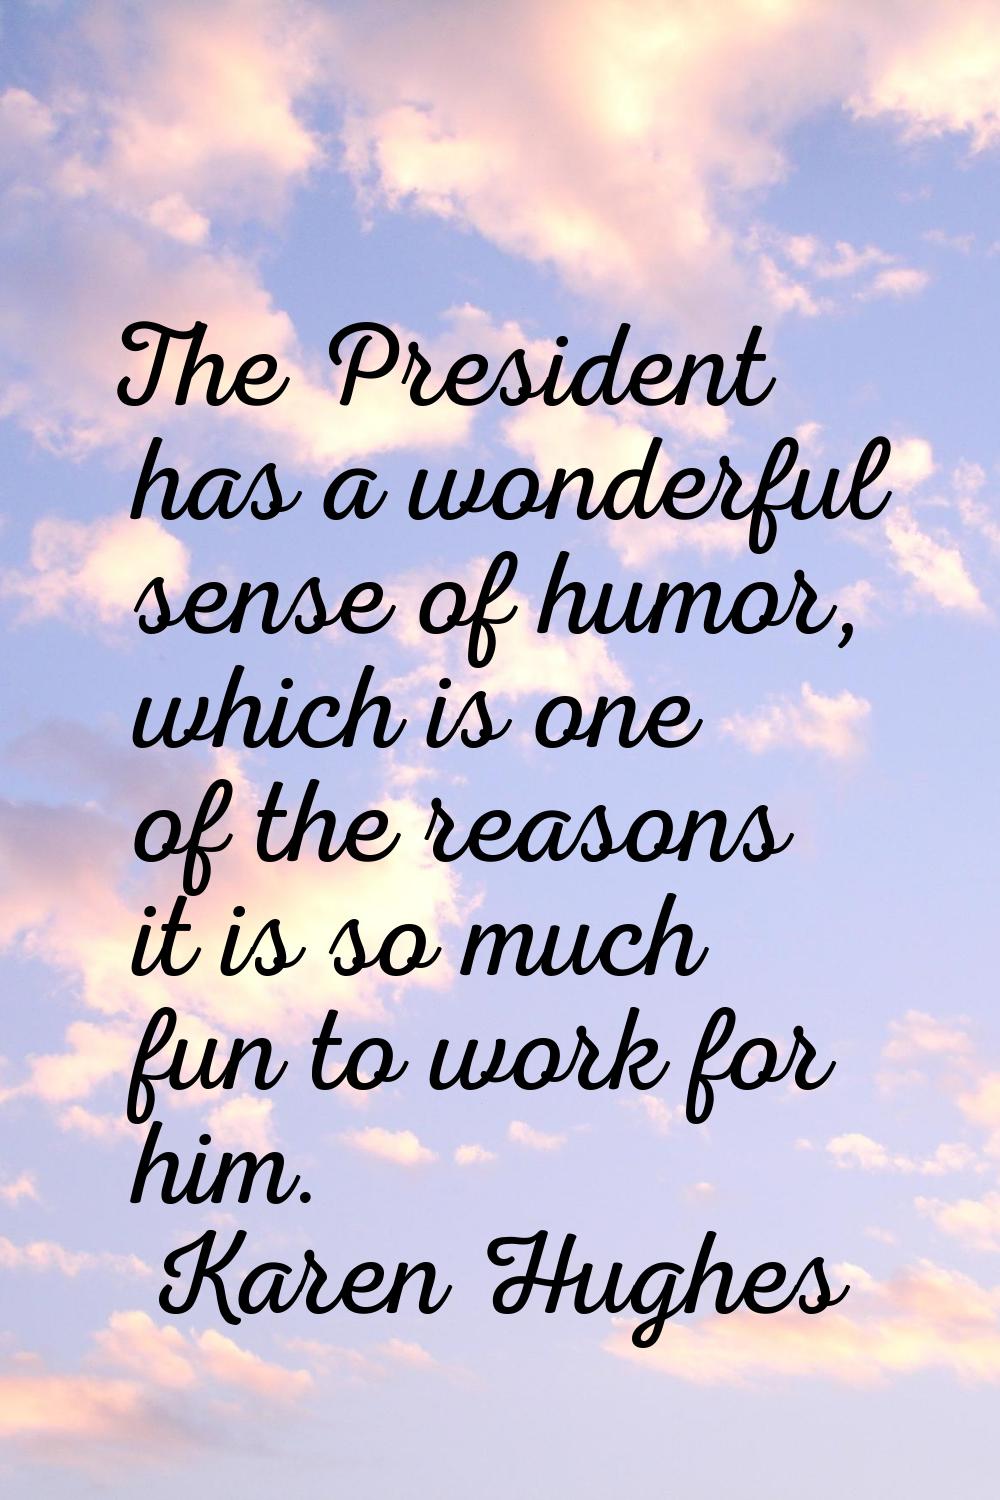 The President has a wonderful sense of humor, which is one of the reasons it is so much fun to work